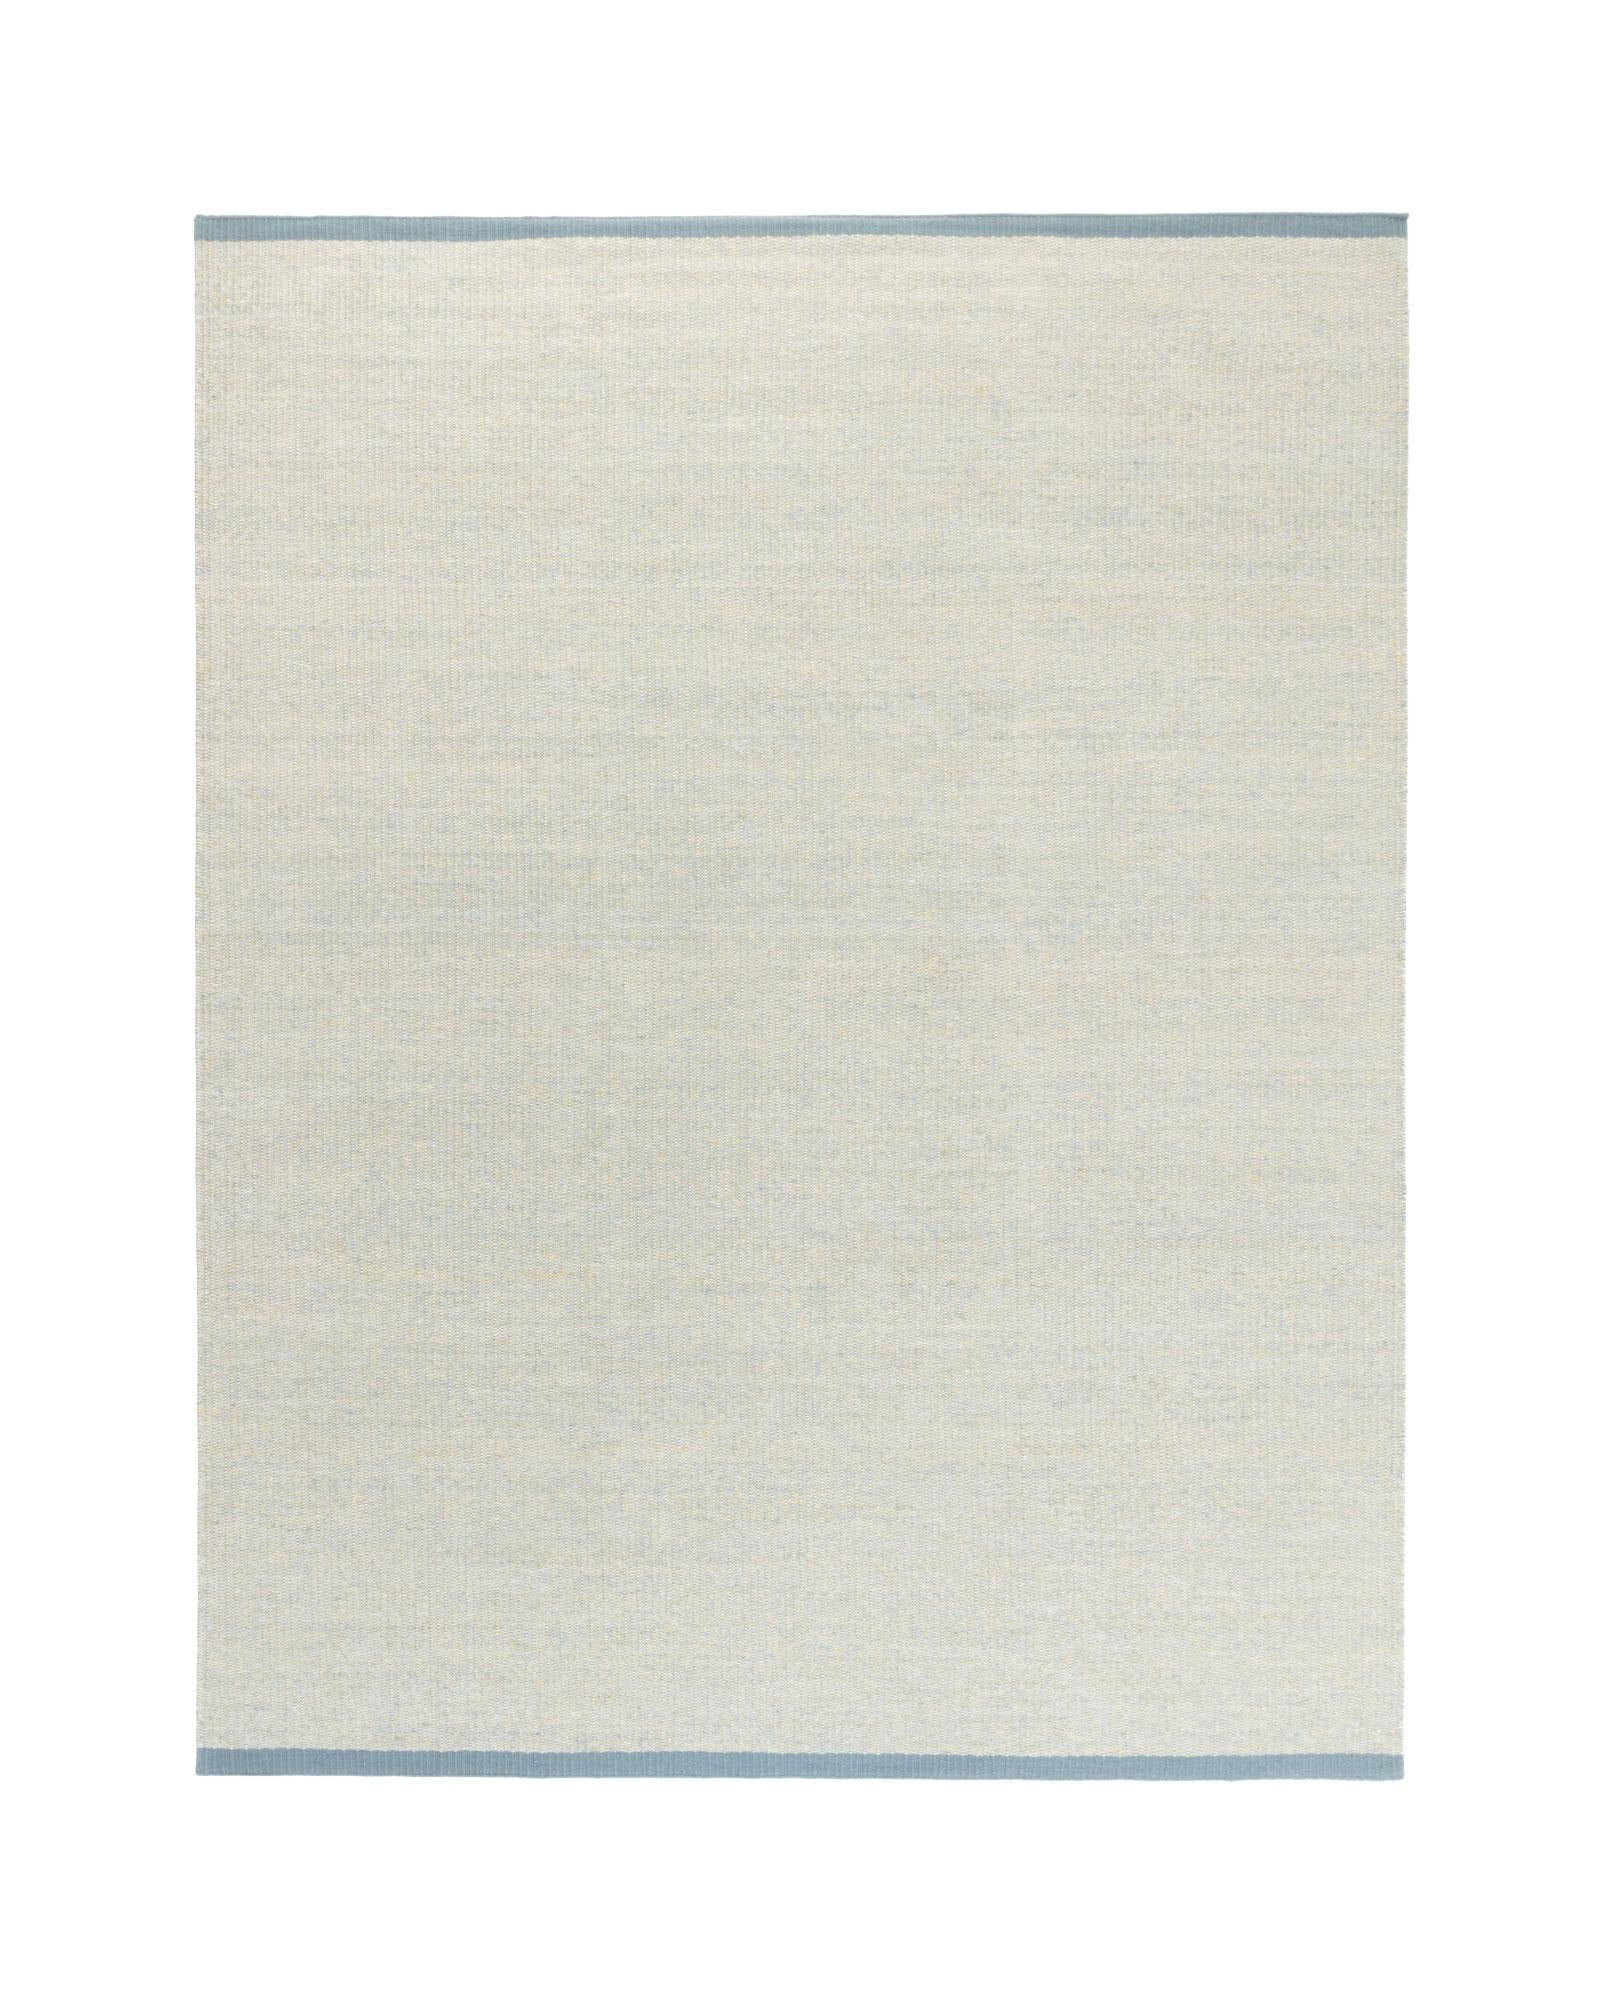 Sky is a carpet produced by the brand CC-Tapis. The Sky rug is part of the Everyday Collection and is made from 100% wool, giving it a soft feel.

The Sky rug is available in two colours and is a perfect combination of elegance, comfort and